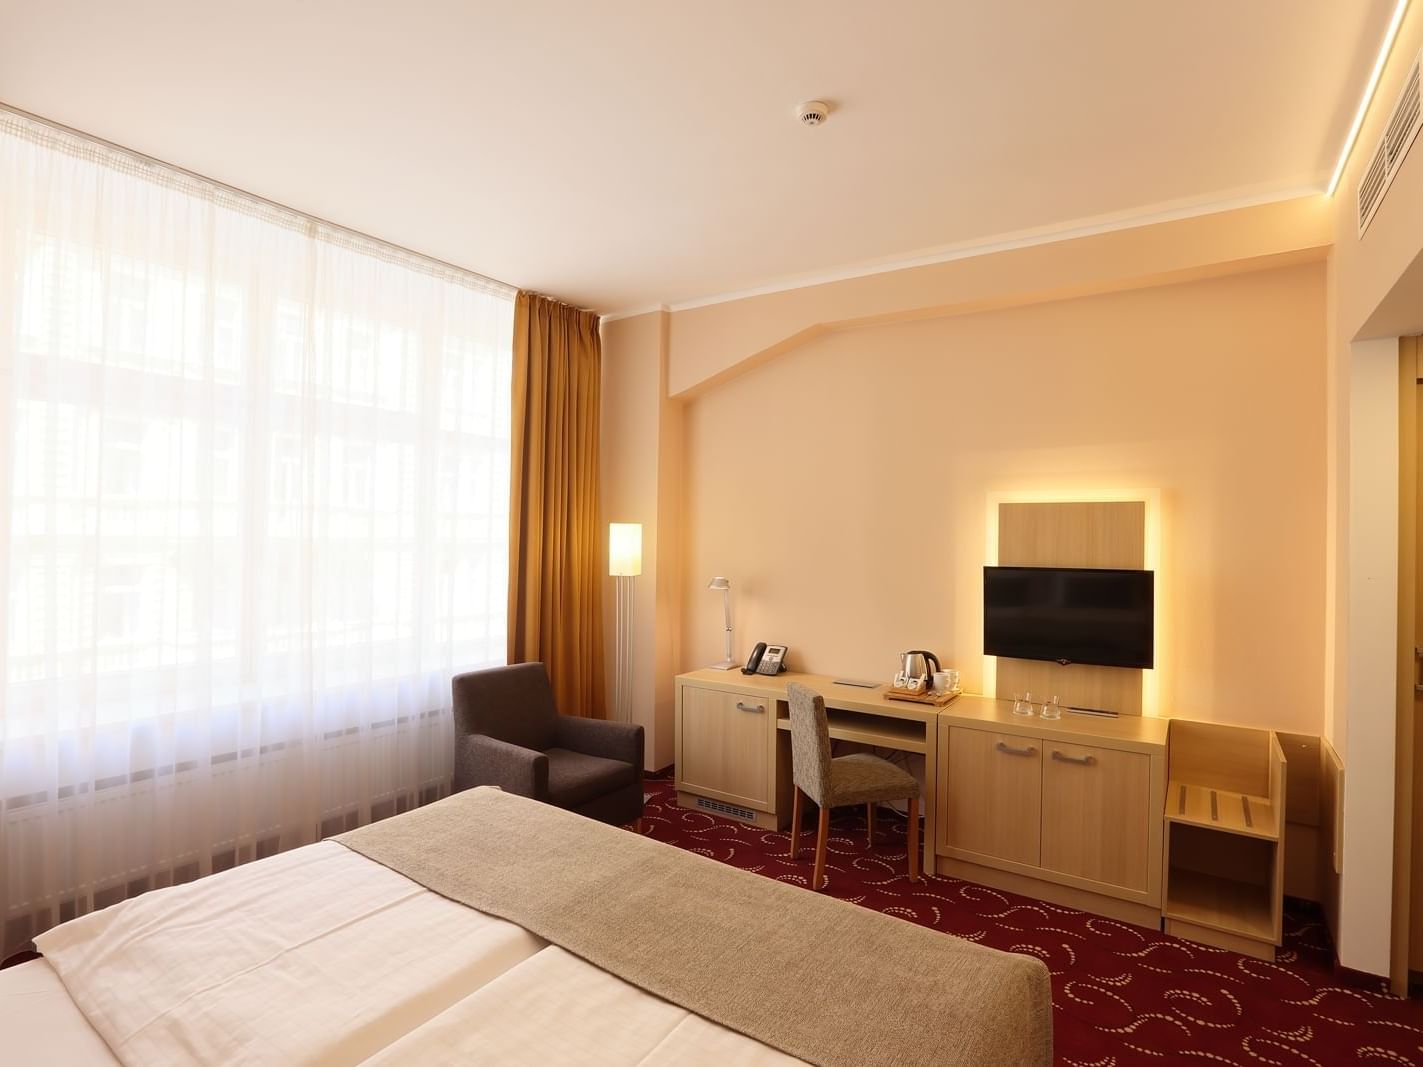 Space, comfort, luxury, lightness - the best blend for your stay in Prague centre